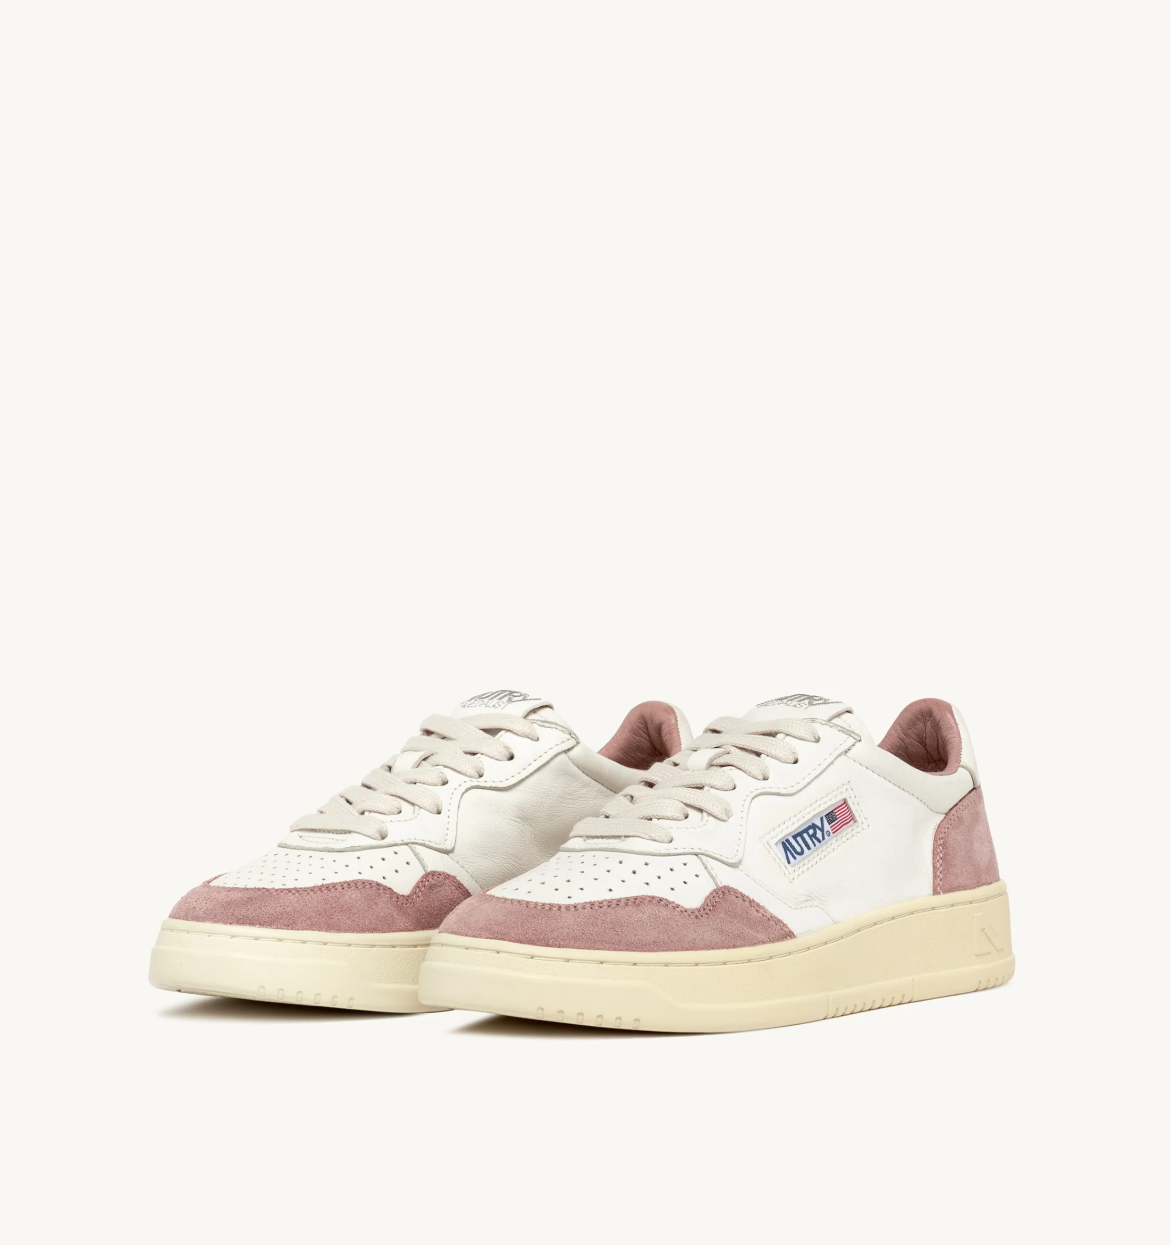 MEDALIST LOW GS28 GOAT/SUEDE WHITE/NUDE